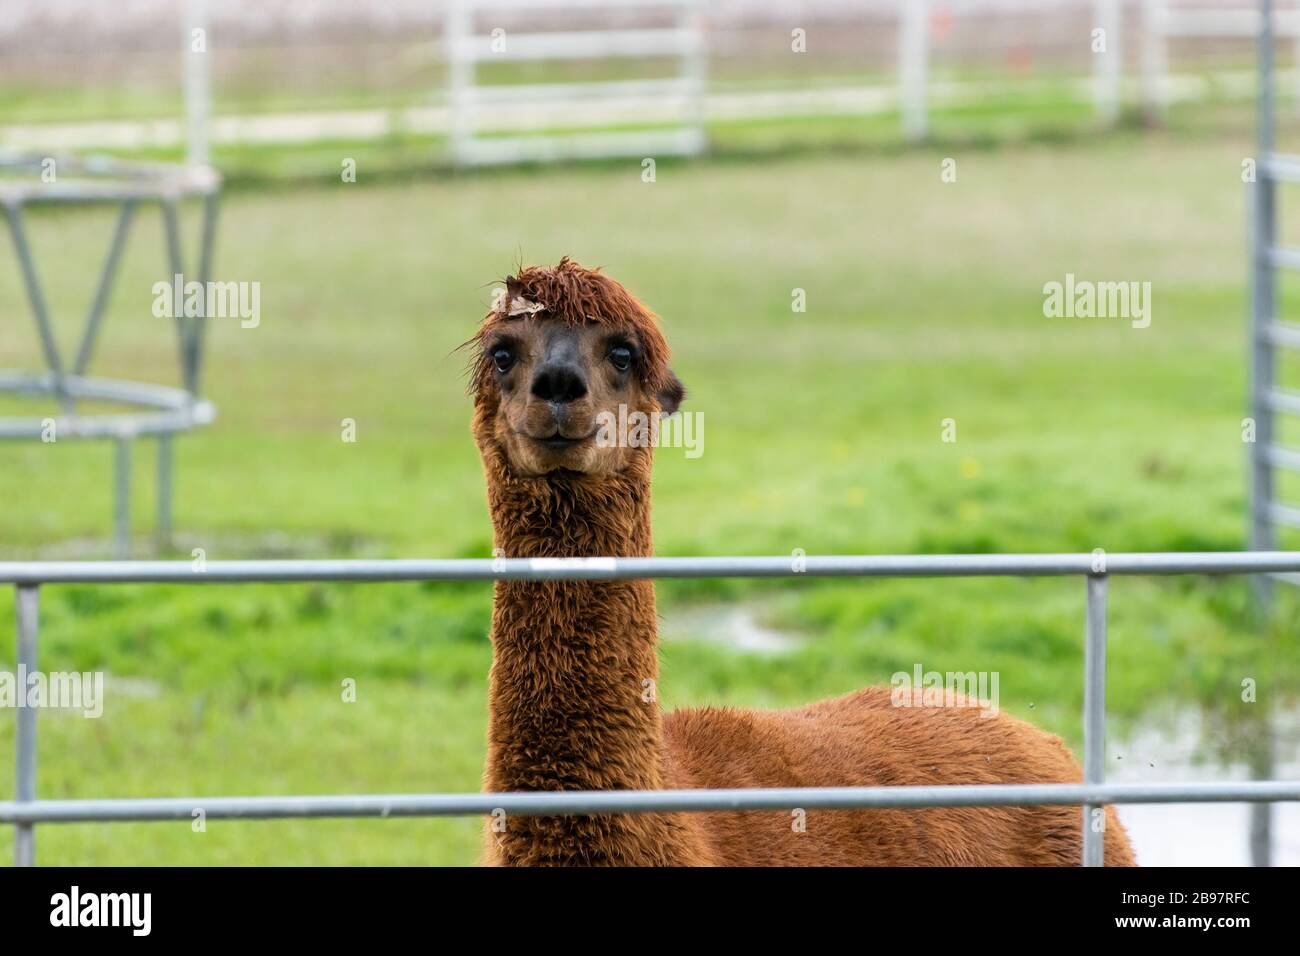 Cute, furry, brown Alpaca with a leaf in the matted hair on top of its head appearing to smile as it stares with curiosity over a silver, metal fence Stock Photo